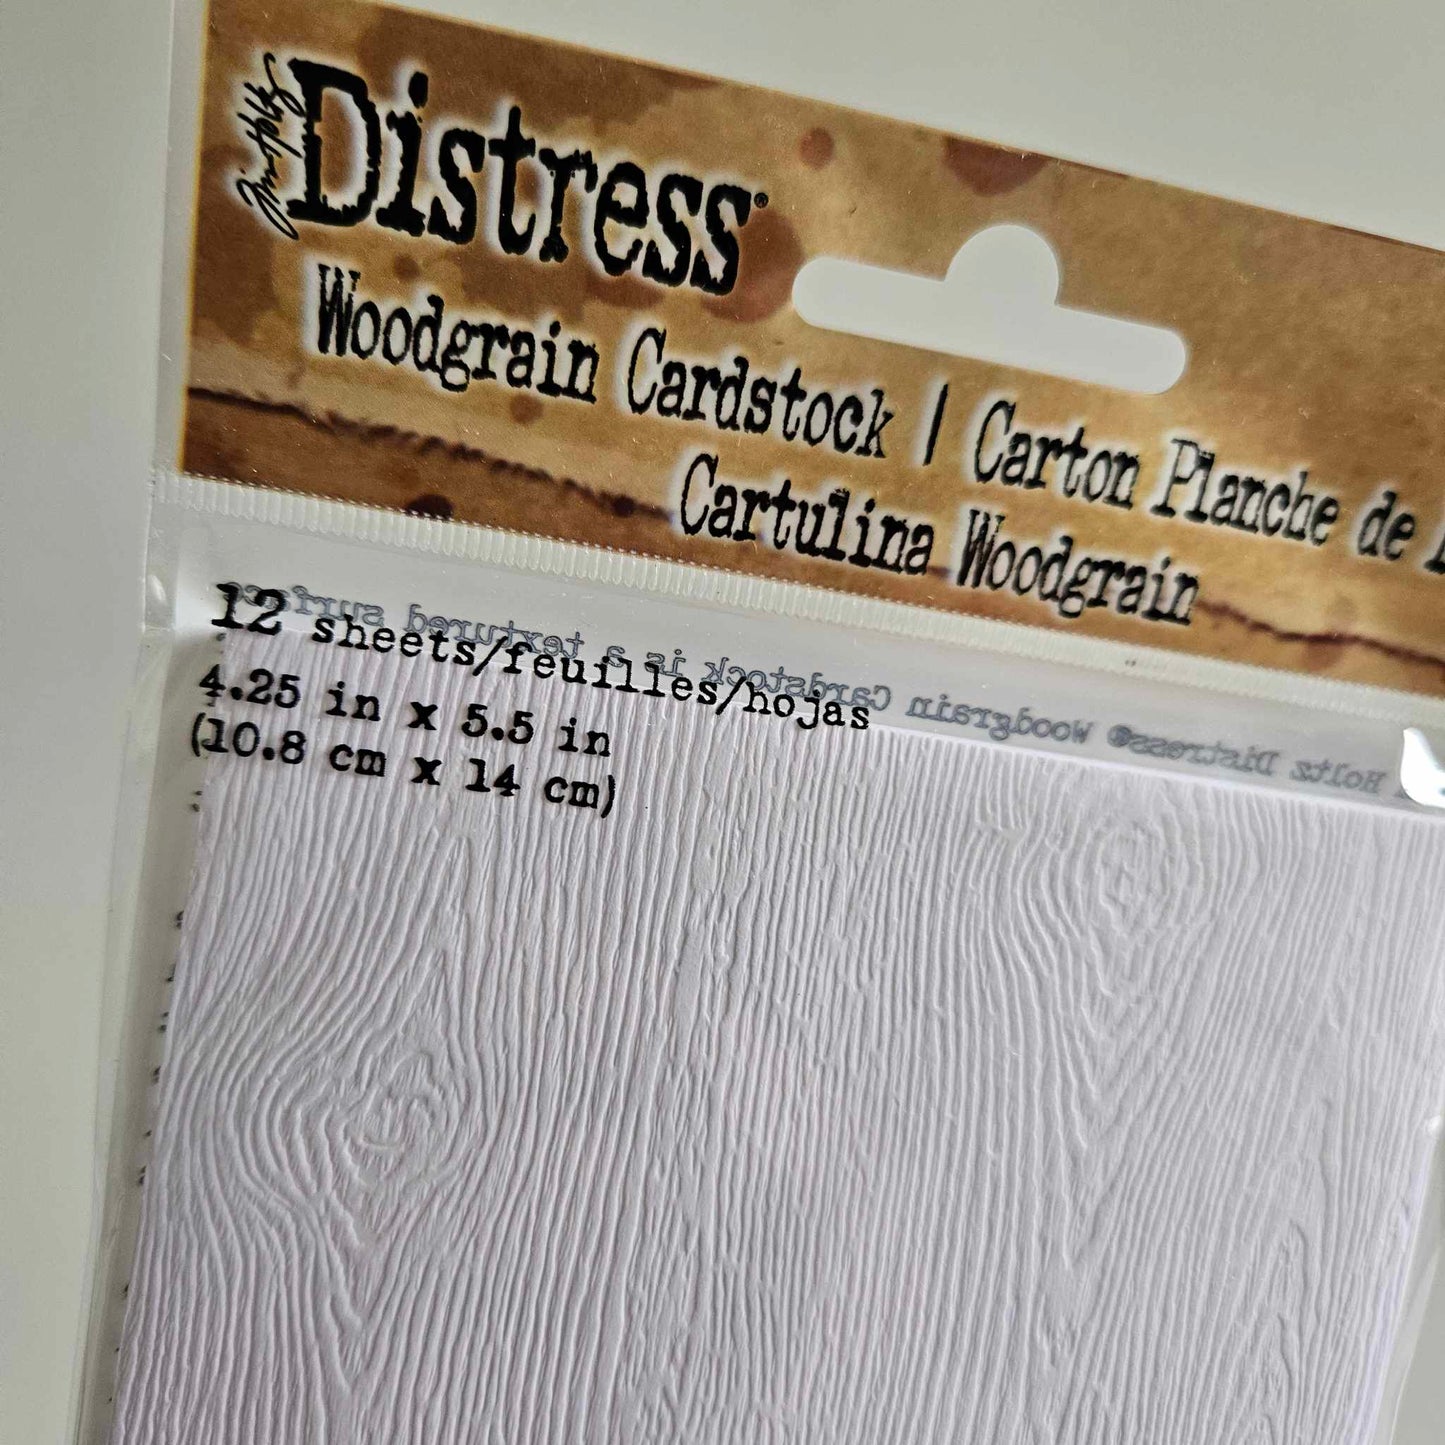 Distress Cardstock Packs: Woodgrain and Leather - Tim Holtz Ranger - Aussie Paper Crafting - The Turtle Journal White Paper Textured